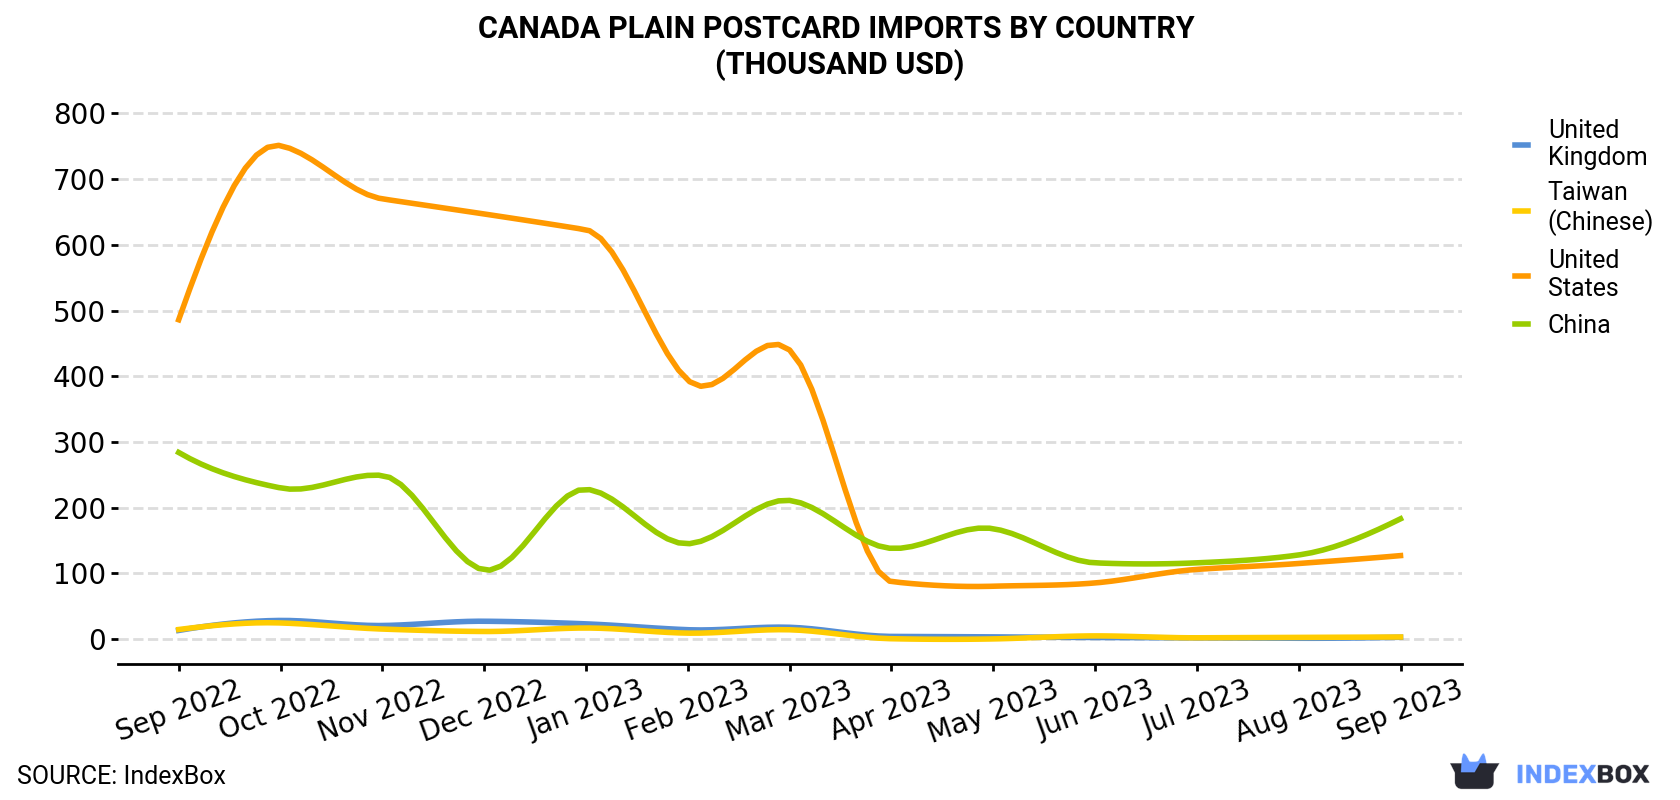 Canada Plain Postcard Imports By Country (Thousand USD)